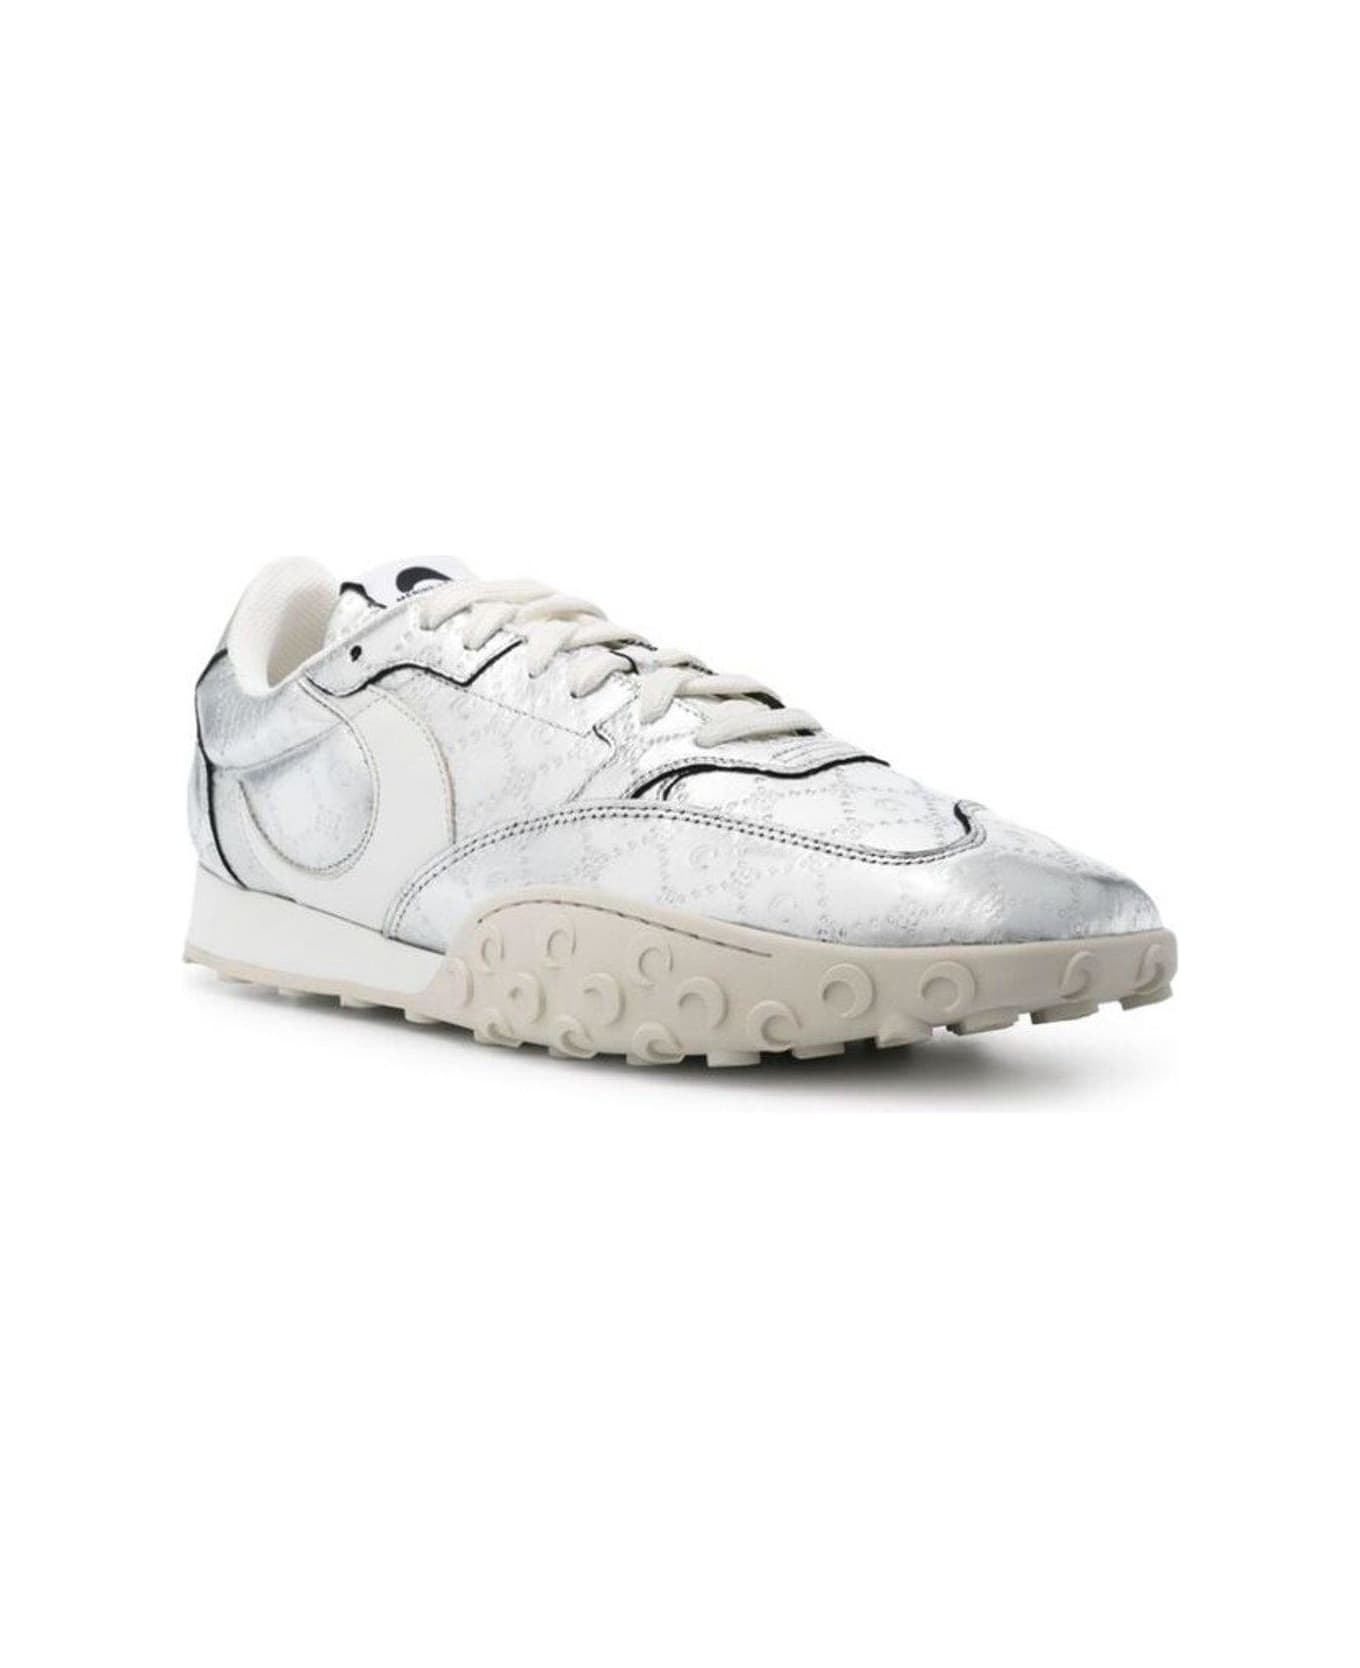 Marine Serre Lace-up Sneakers - SILVER スニーカー